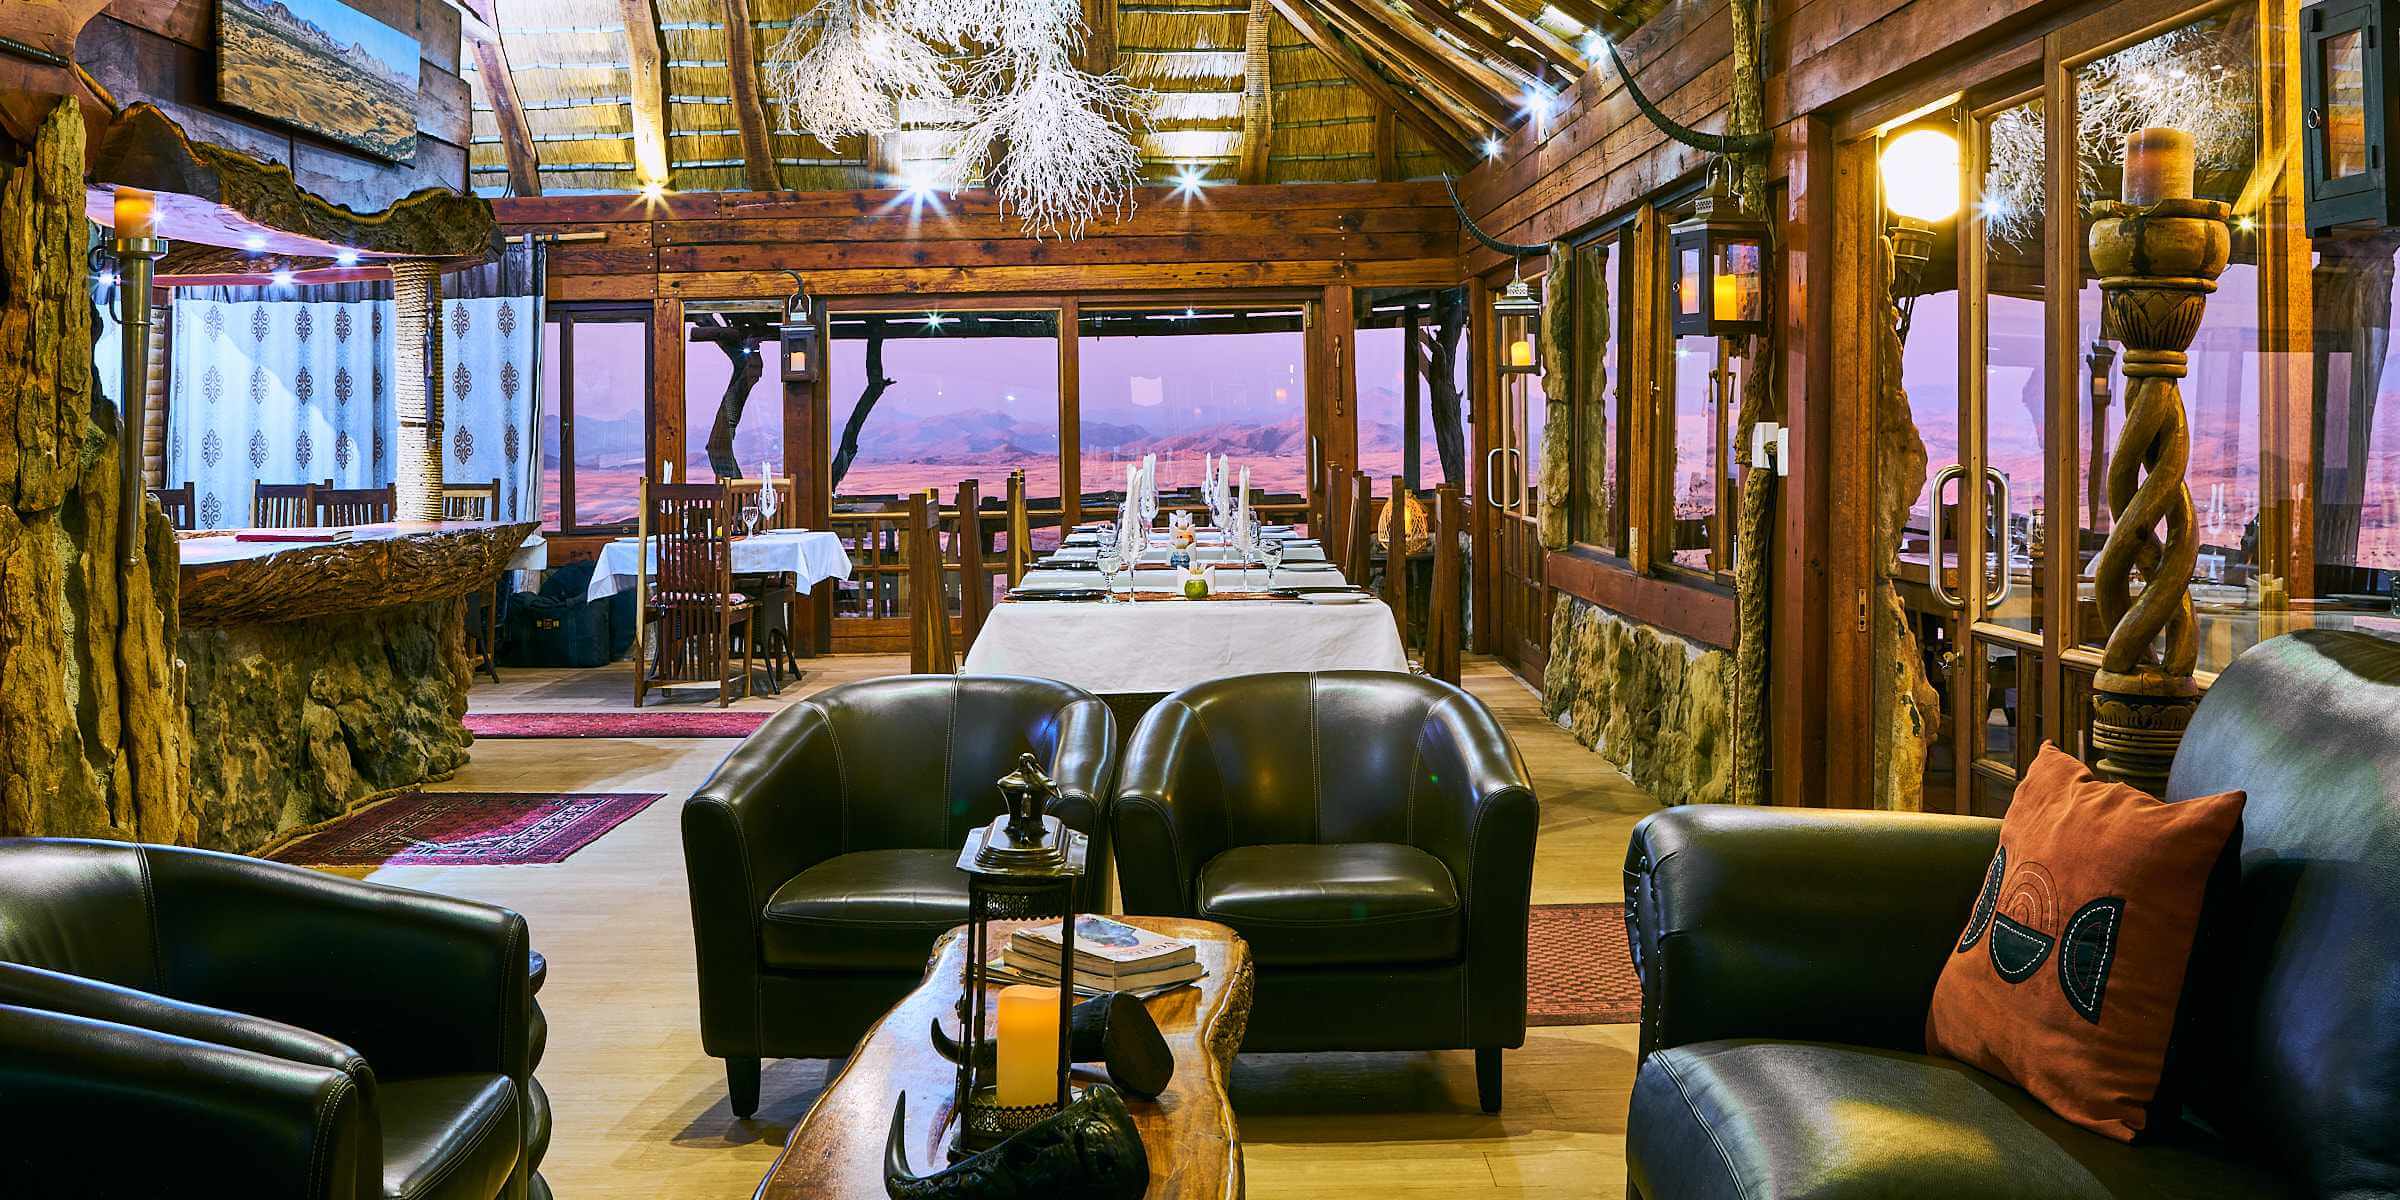 The lodge's restaurant with the pink hues of dusk in the windows